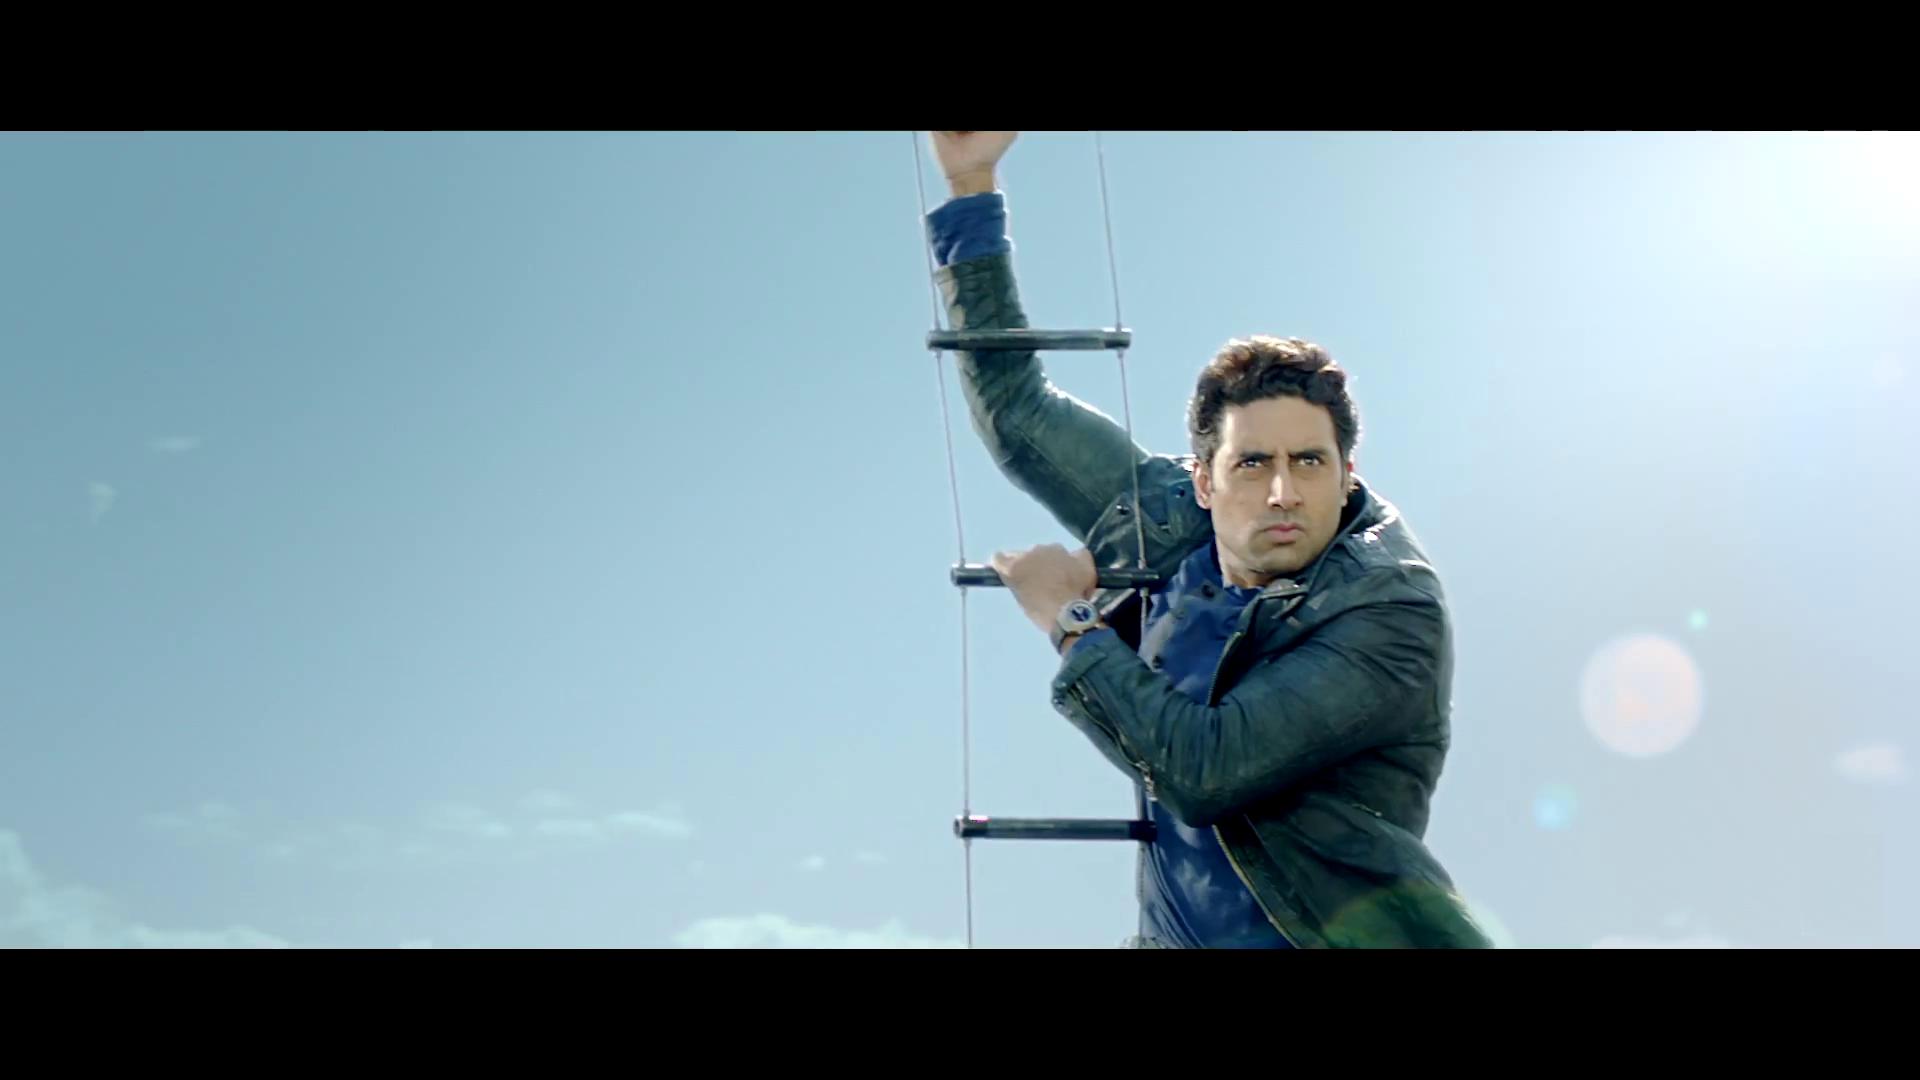 Abhishek Bachchan In Helicopter Movie Dhoom - Abhishek Bachchan Dhoom 3 Helicopter - HD Wallpaper 